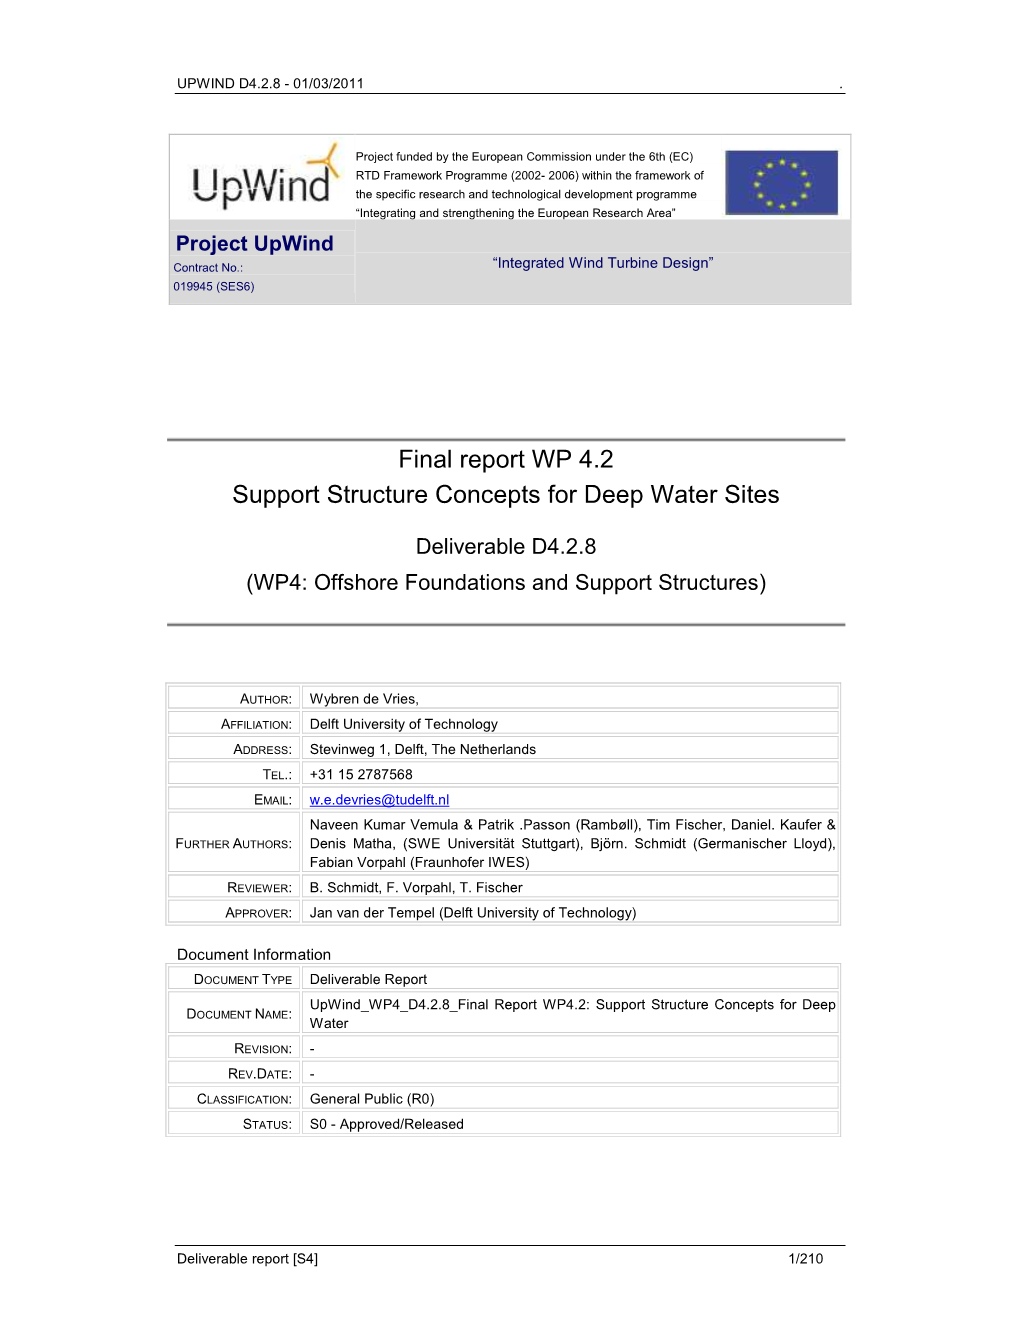 Final Report WP4.2: Support Structure Concepts for Deep DOCUMENT NAME : Water